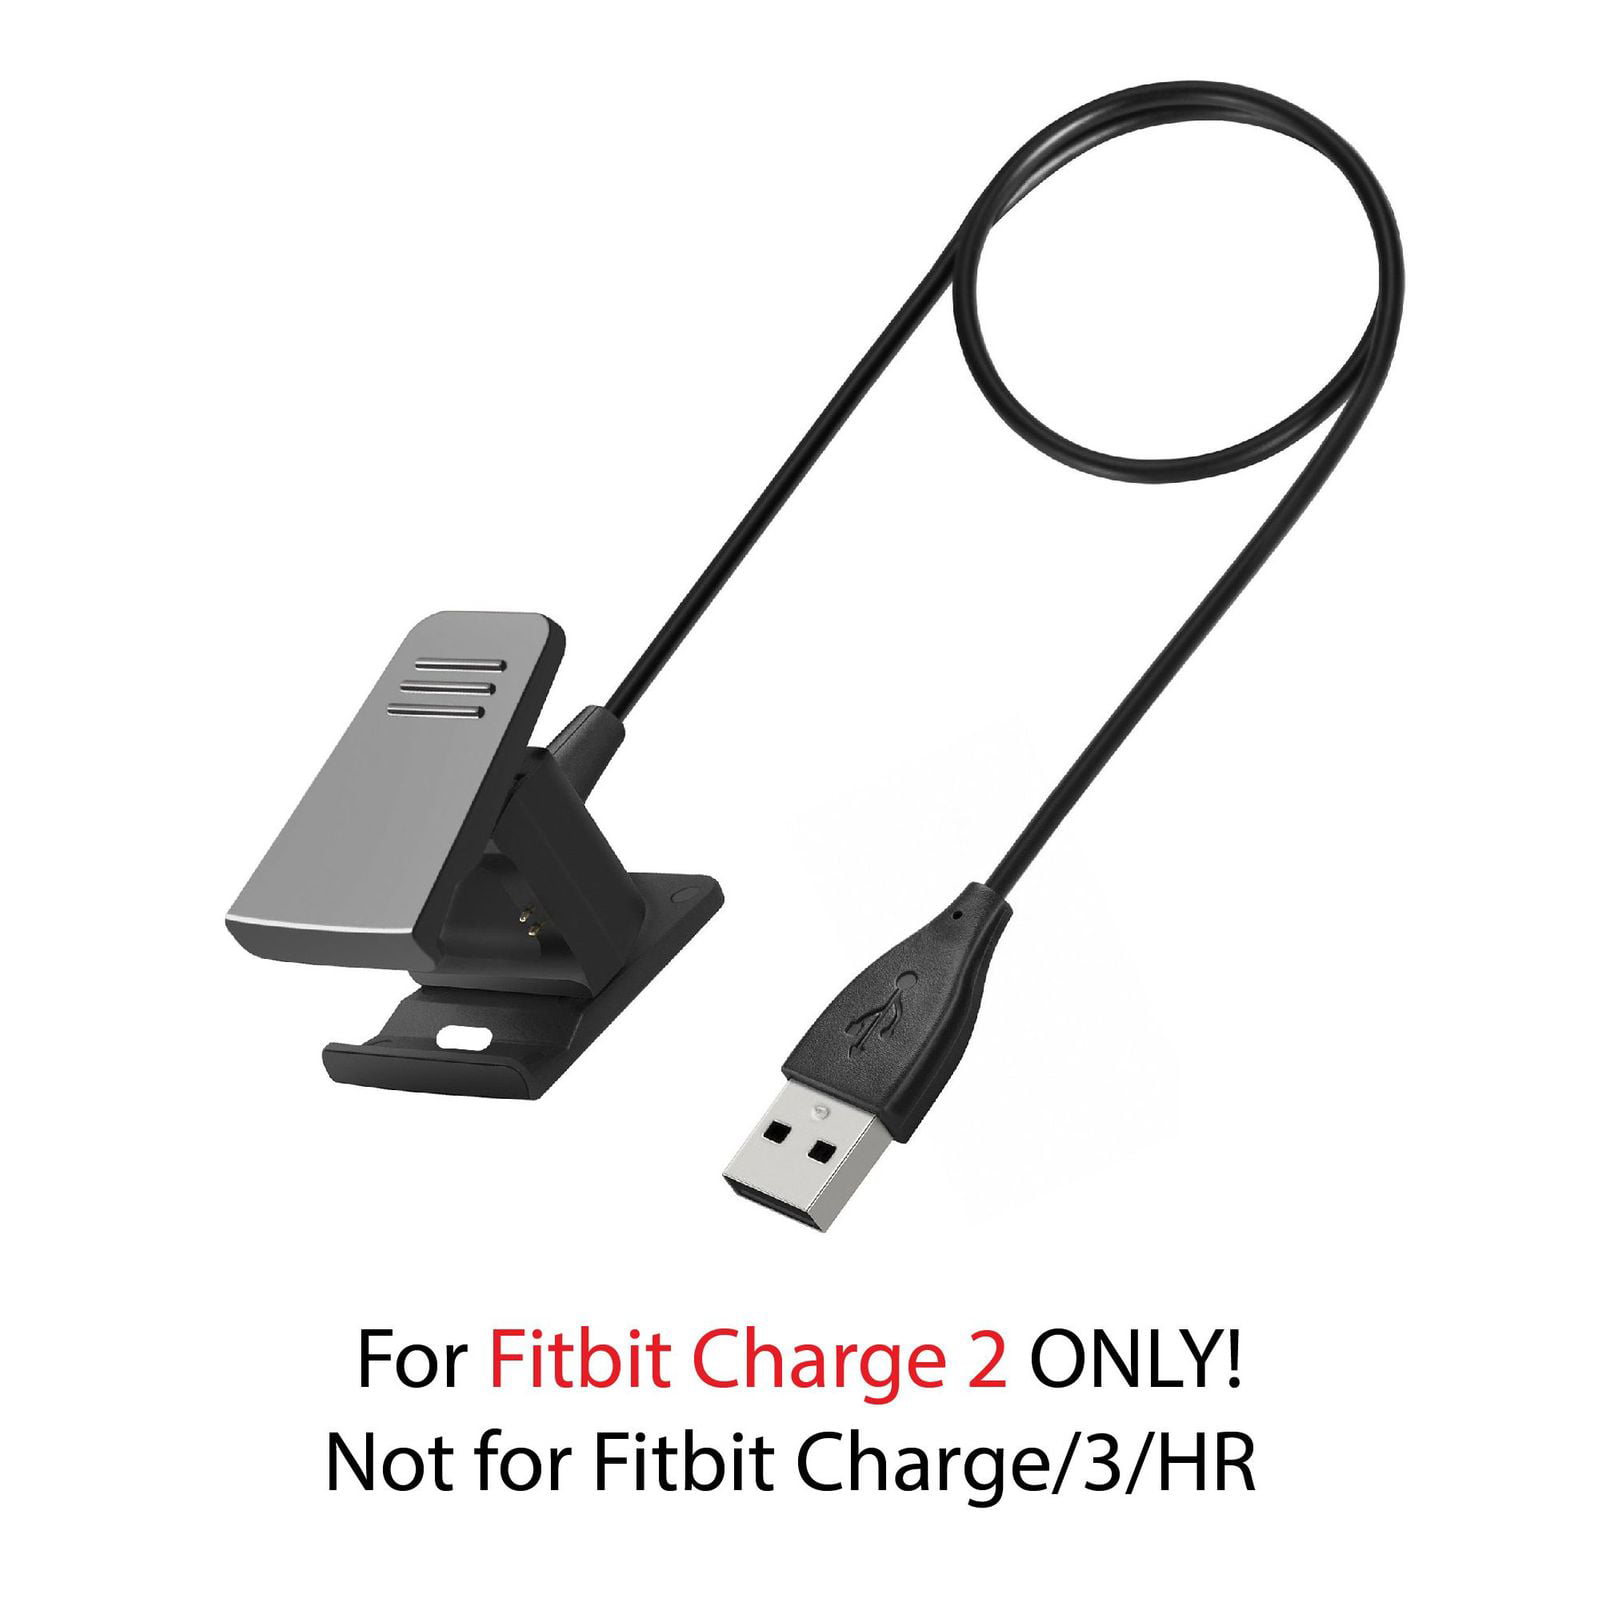 USB Charger Charging Cable For Fitbit Charge HR Wireless Activity Wristband xl 